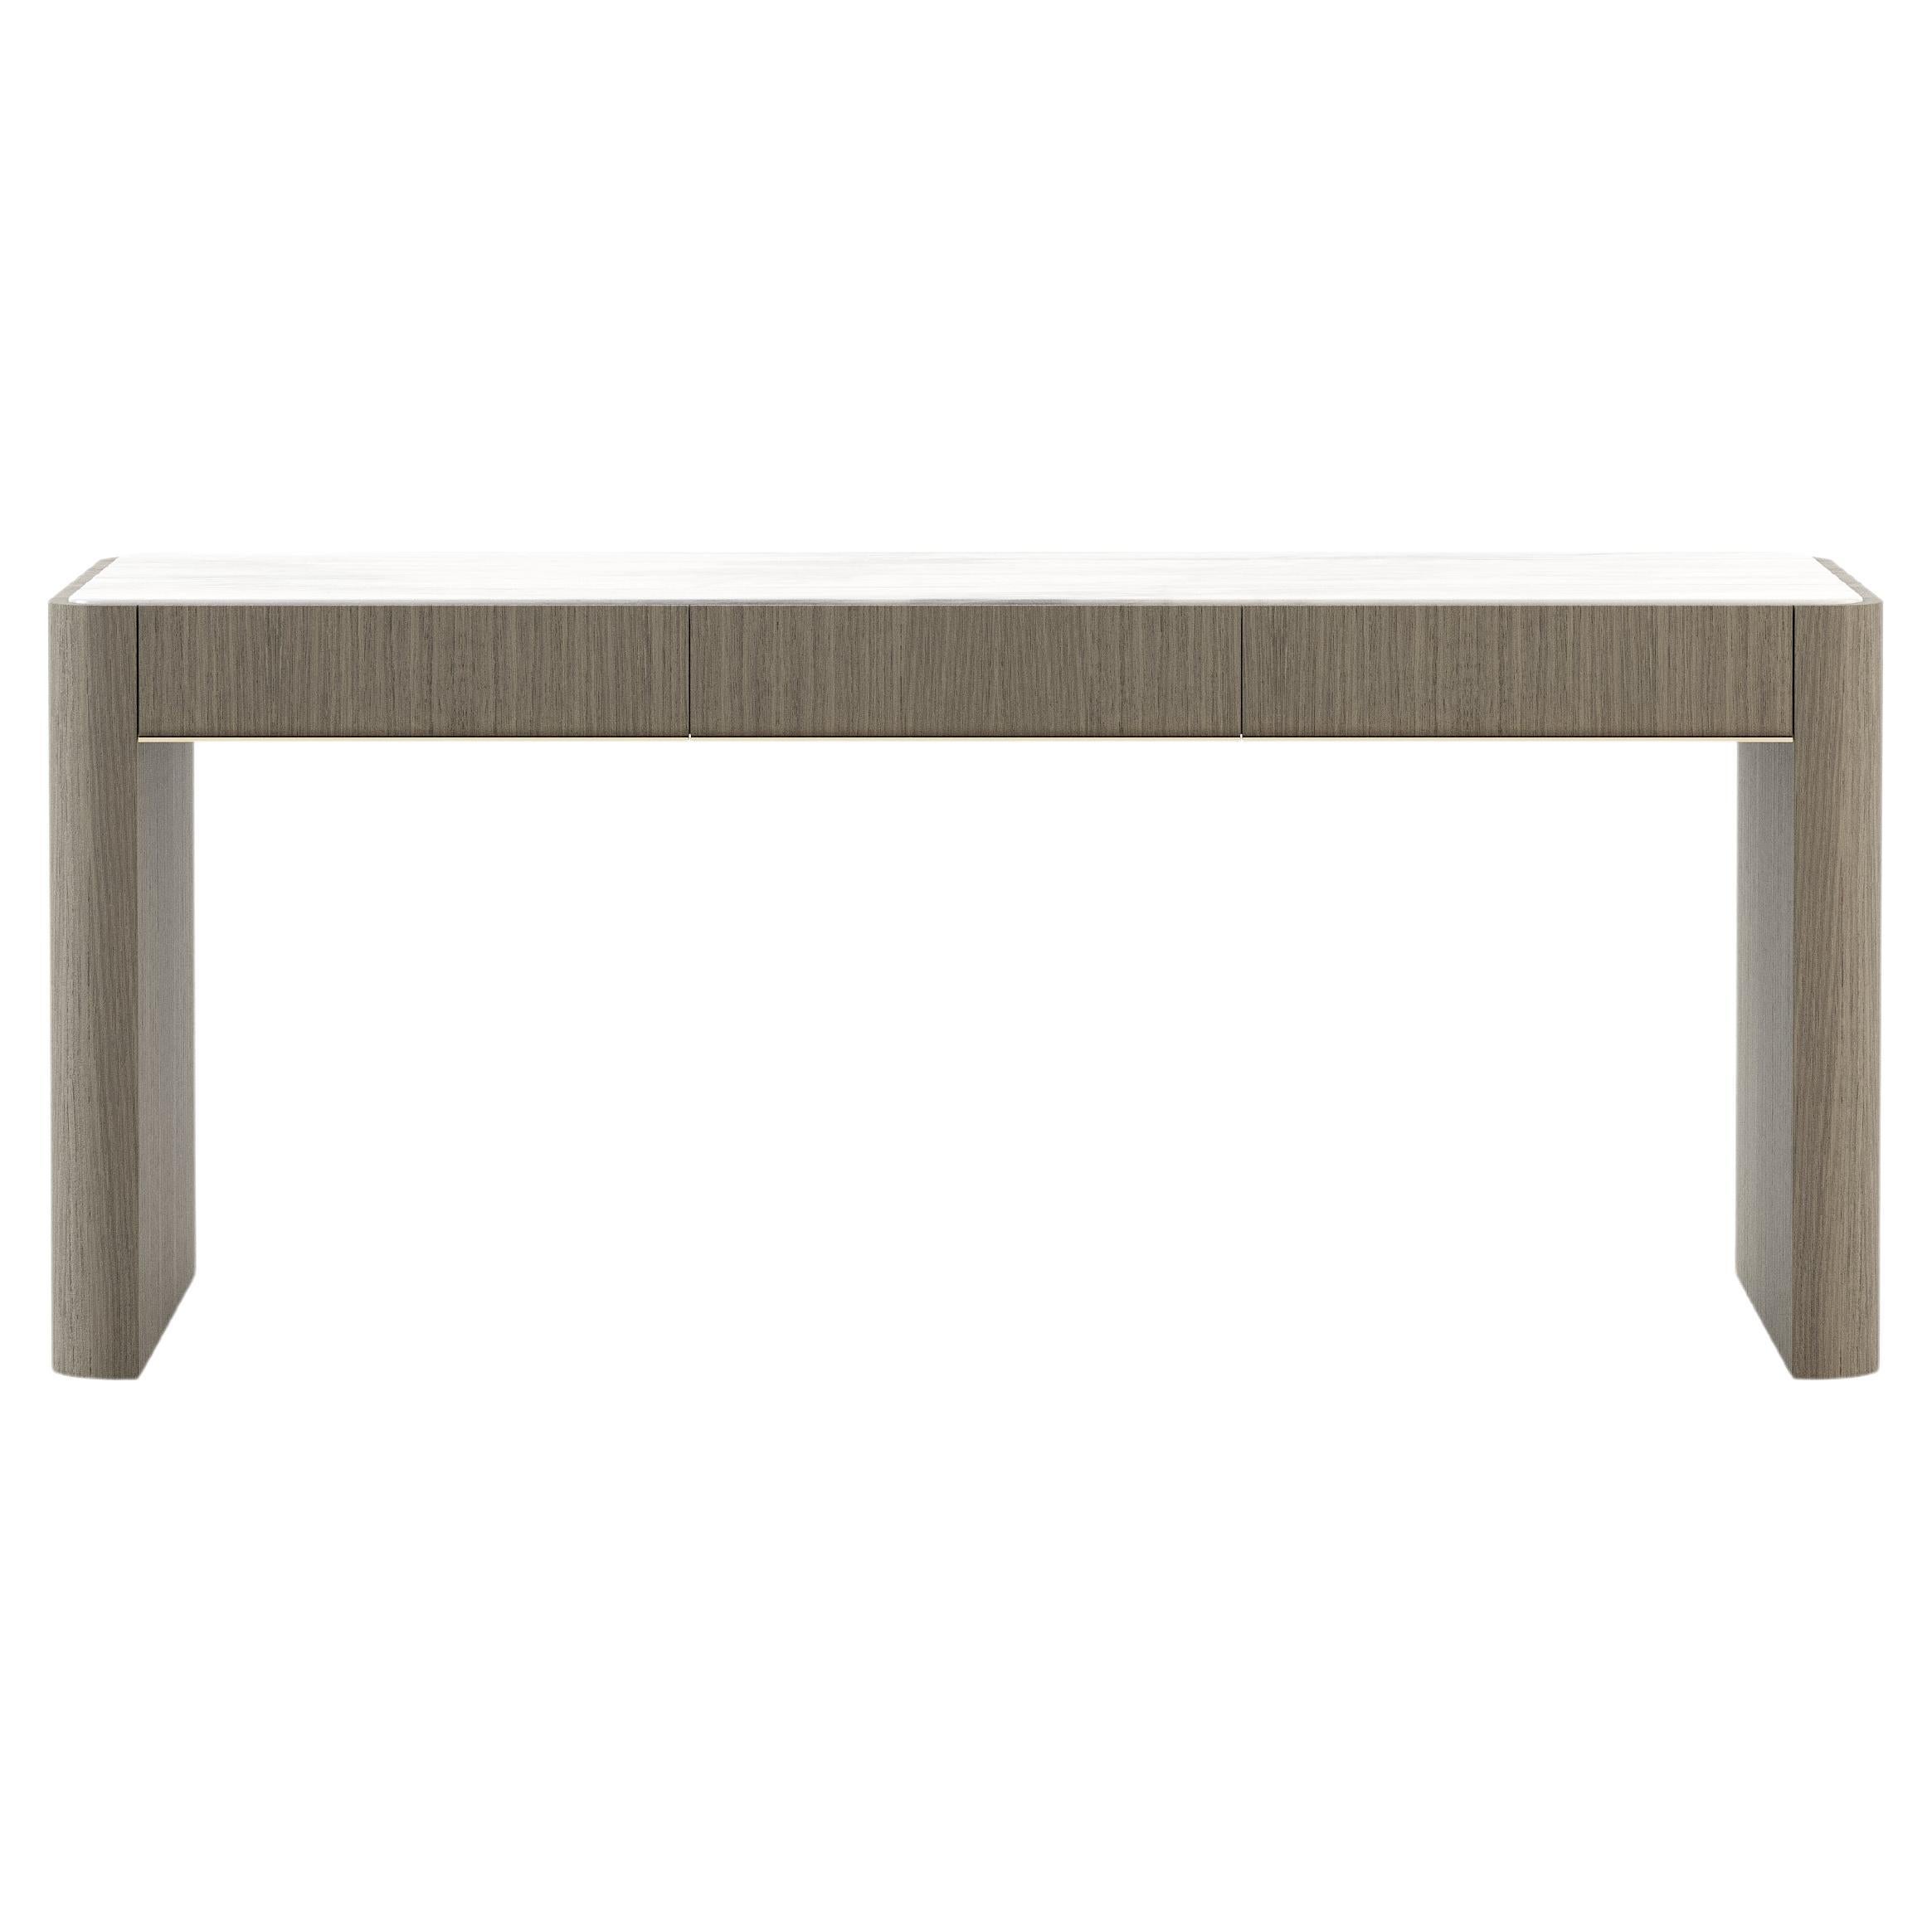 21st-century Contemporary office desk, with customisable wood veneer For Sale